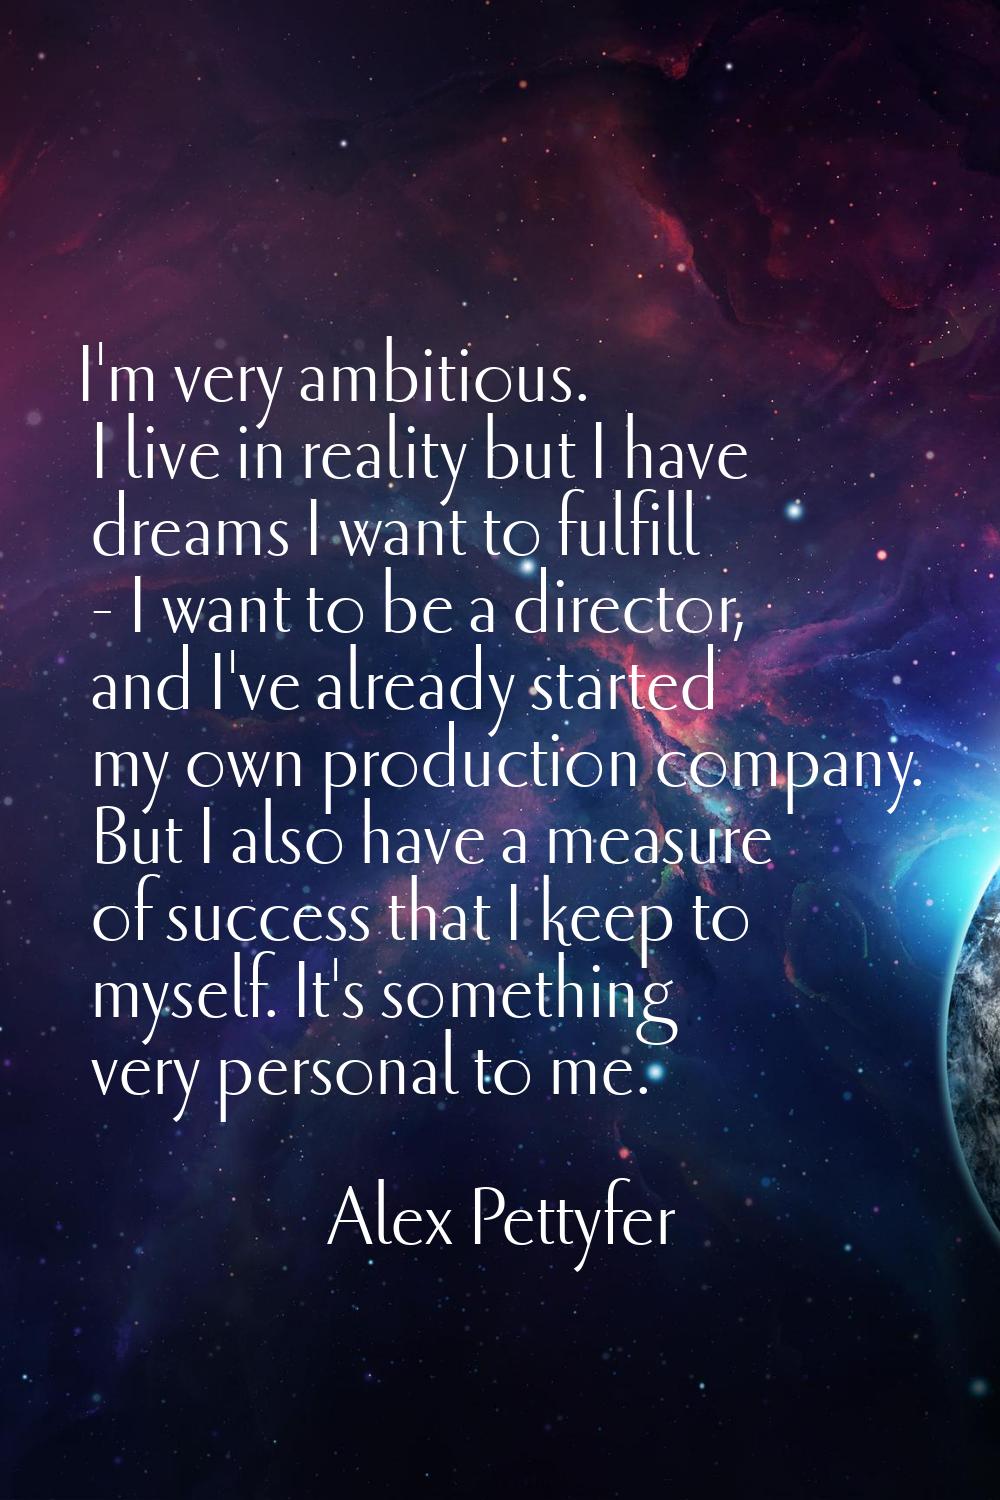 I'm very ambitious. I live in reality but I have dreams I want to fulfill - I want to be a director